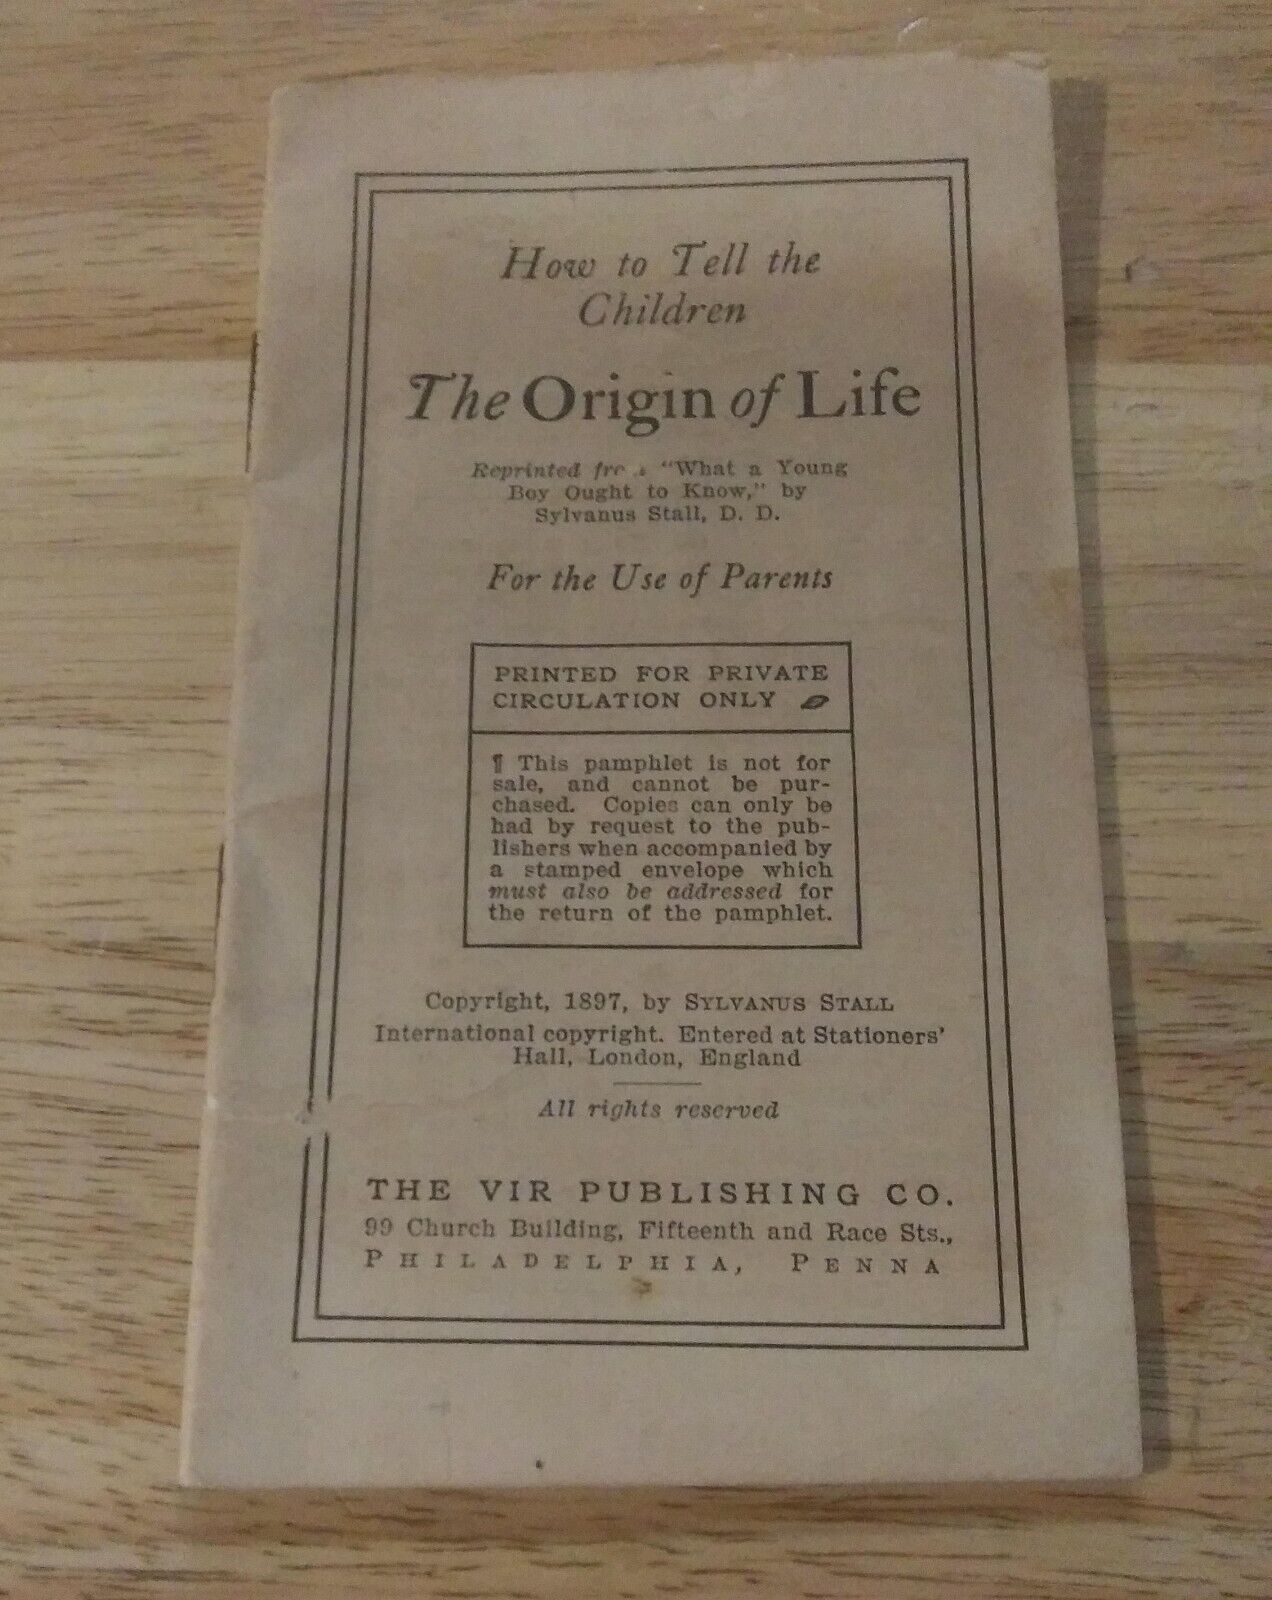 How to Tell the Children The Origin of Life by Sylvanus Stall - (C)1897